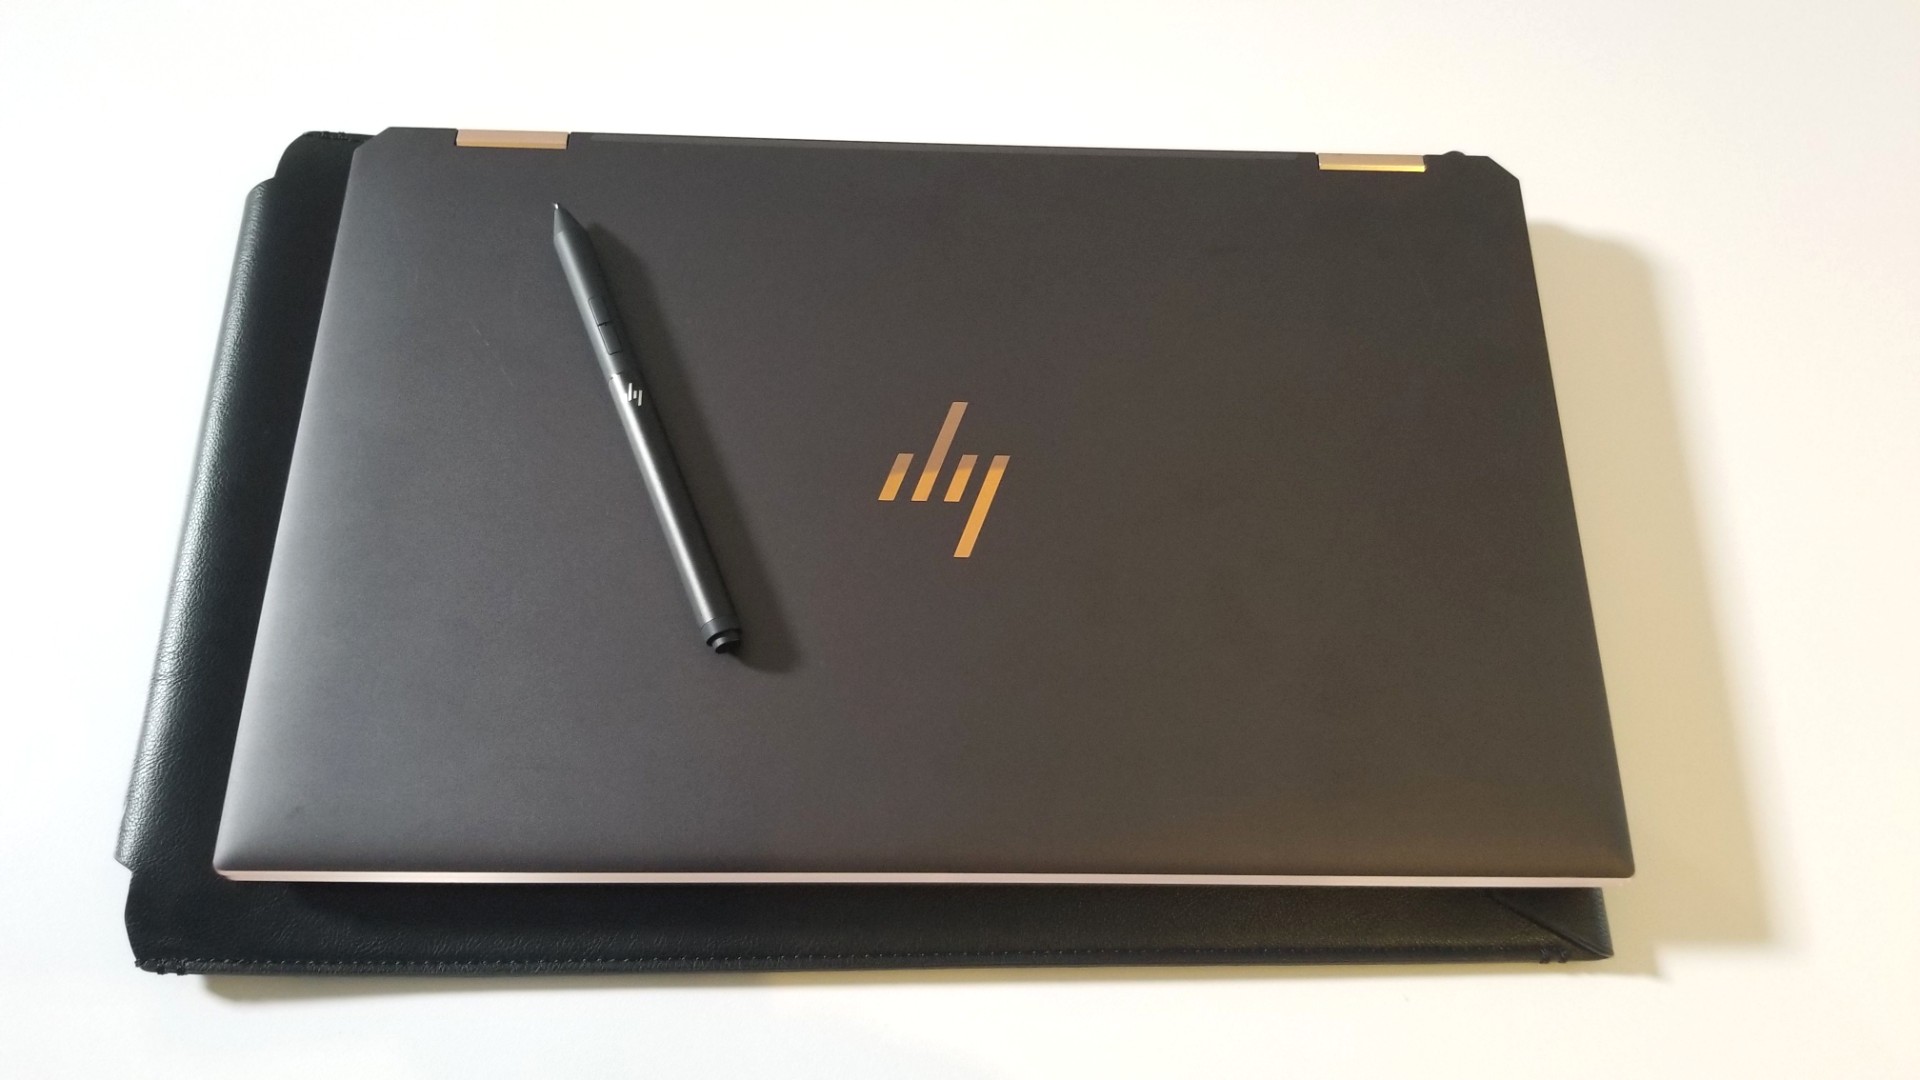 hp spectre x 360 15 features price photos release date x360 20